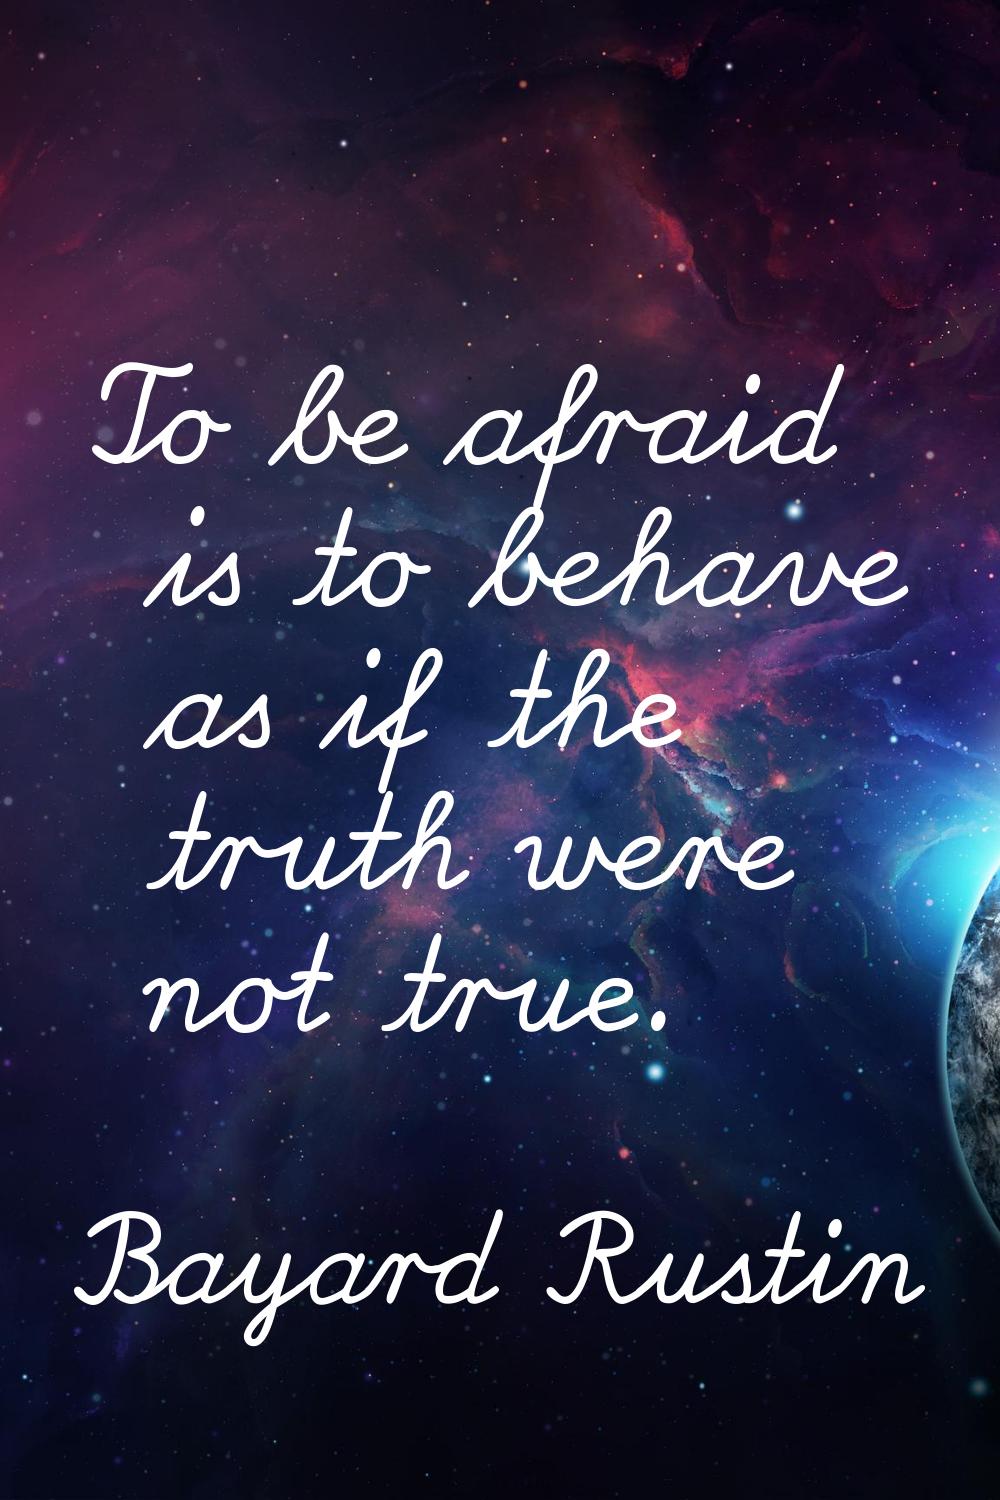 To be afraid is to behave as if the truth were not true.